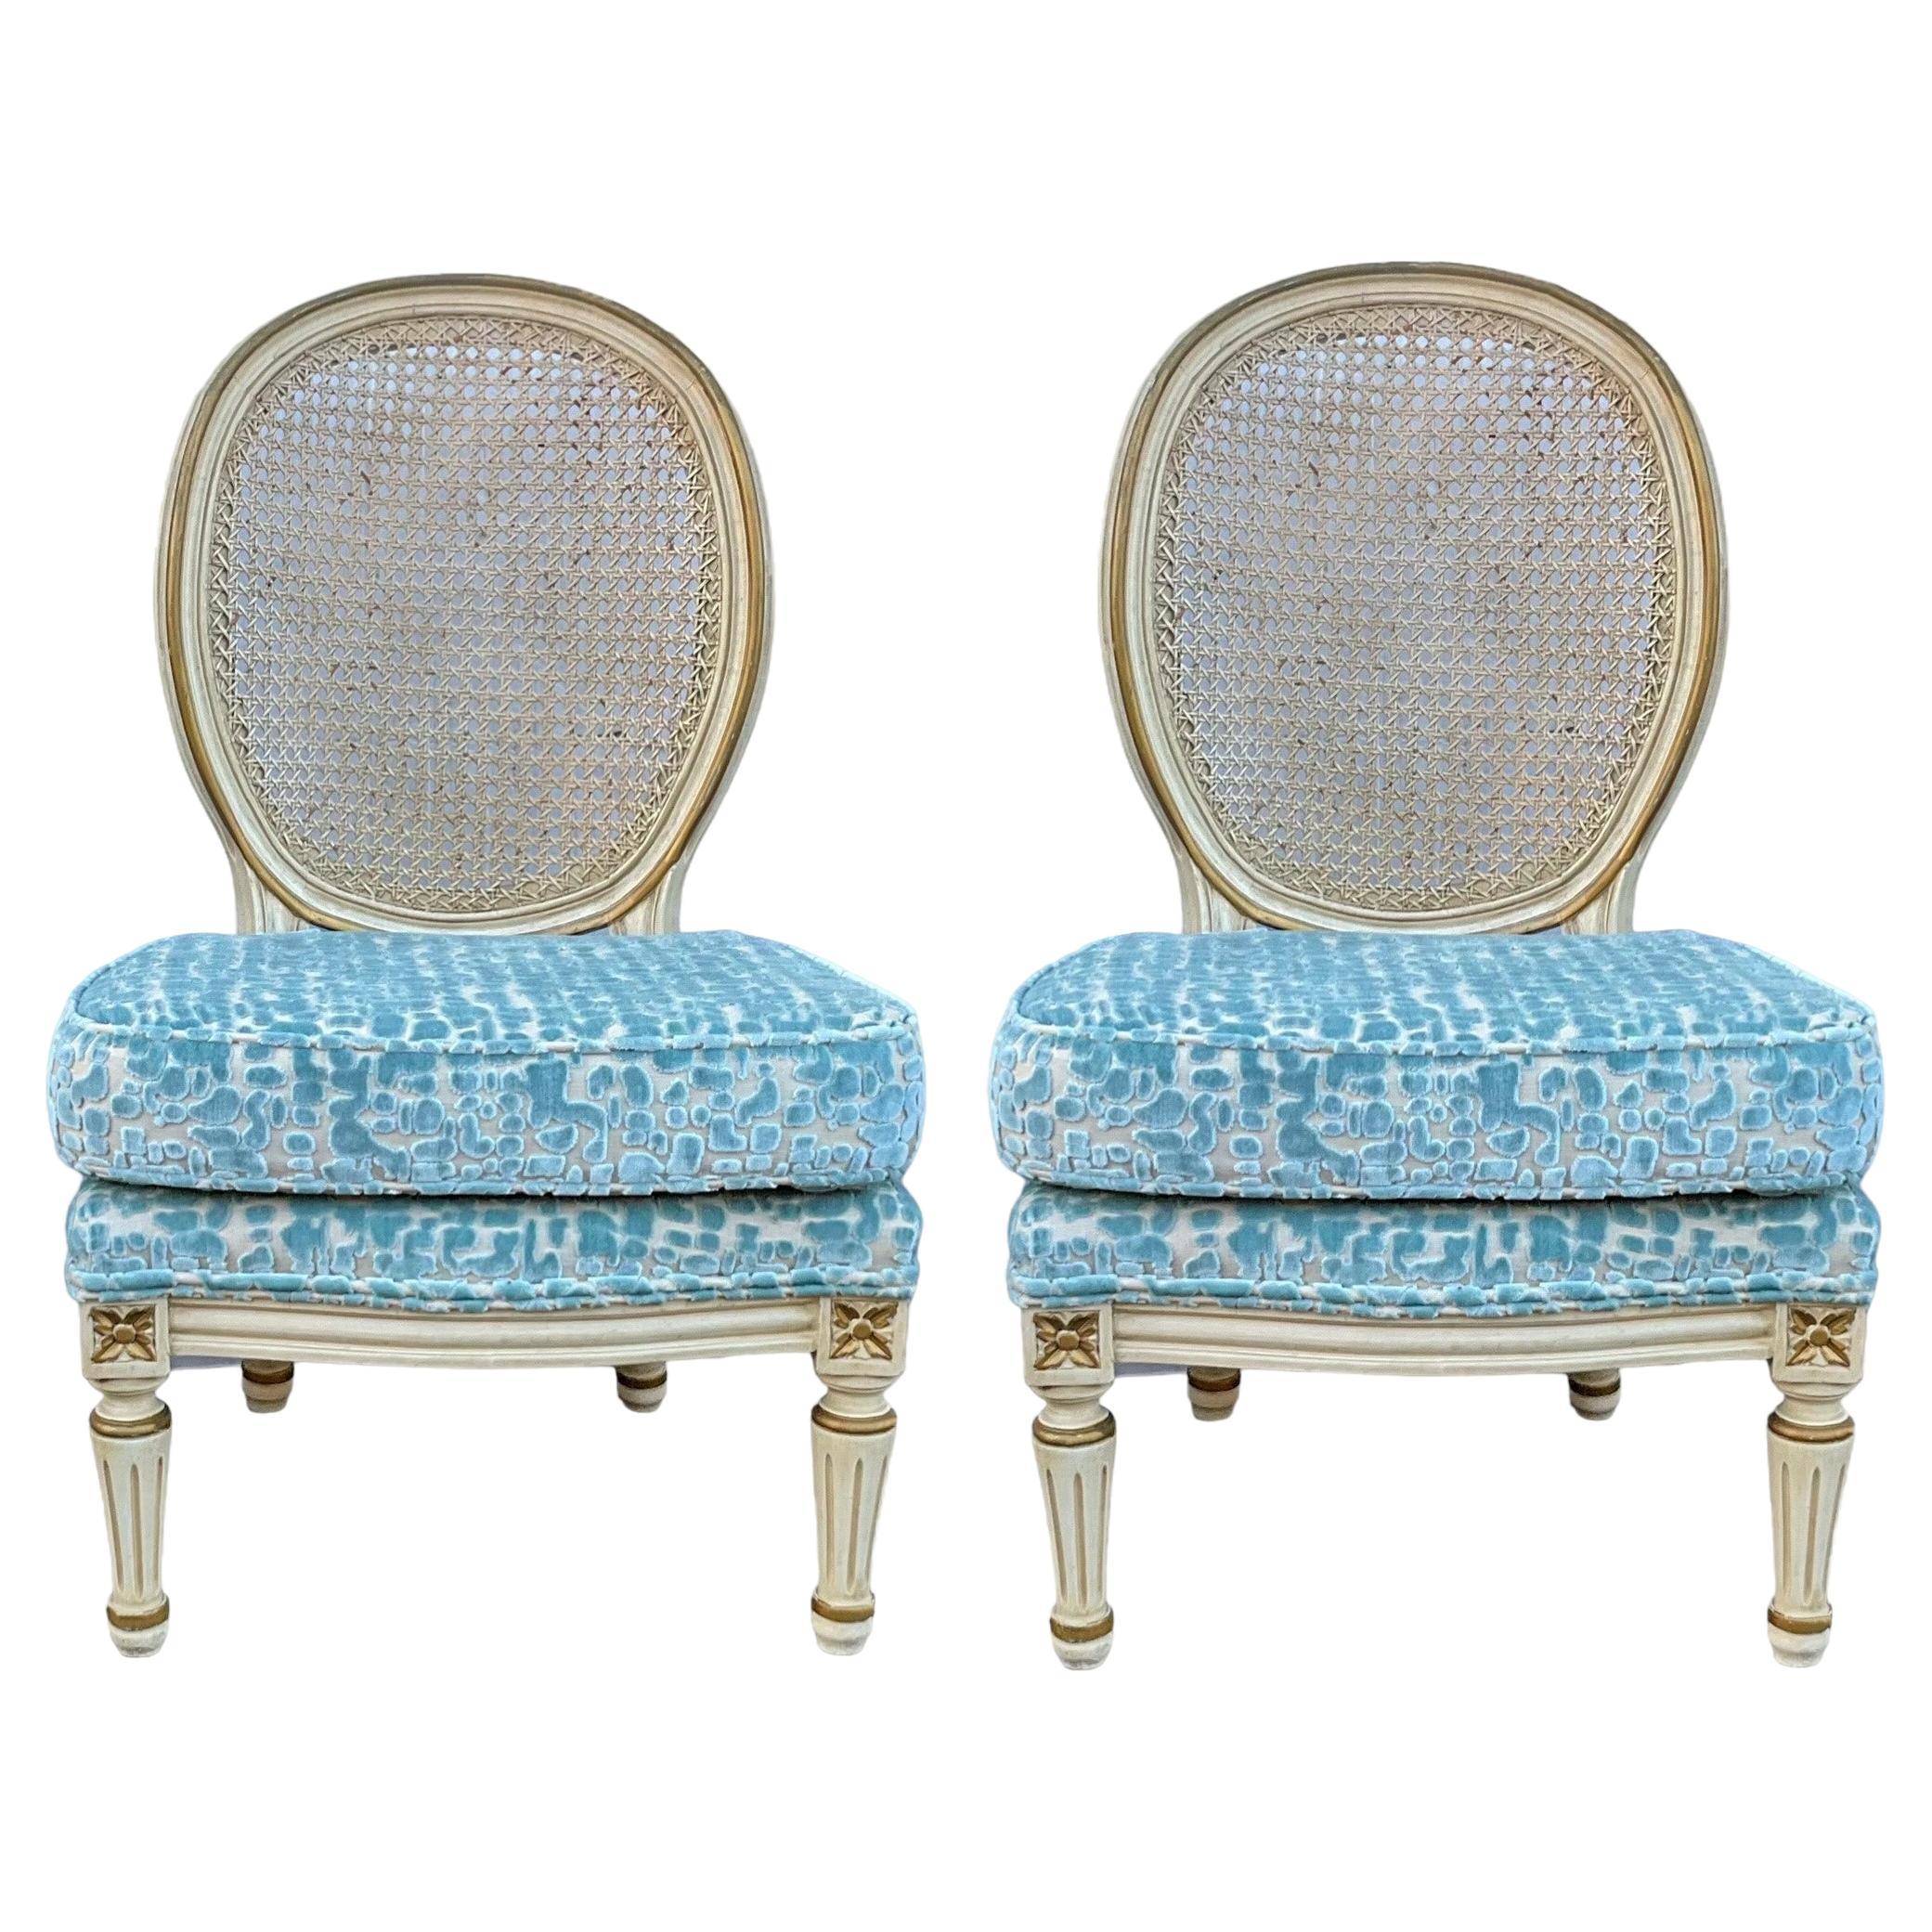 Hollywood Regency Era French Style Painted Slipper Chairs In Cut Velvet -Pair